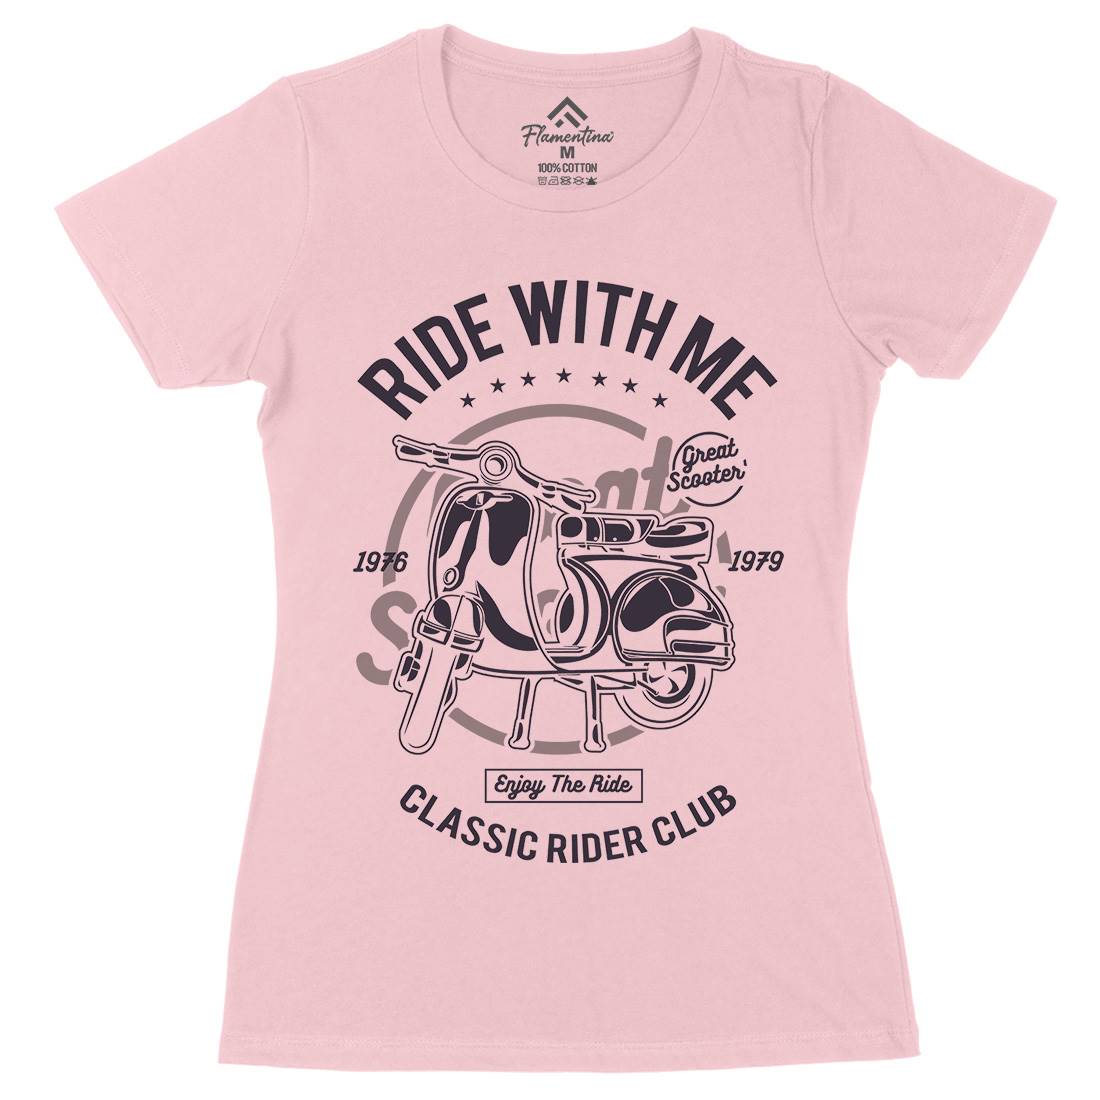 Ride With Me Womens Organic Crew Neck T-Shirt Motorcycles A120